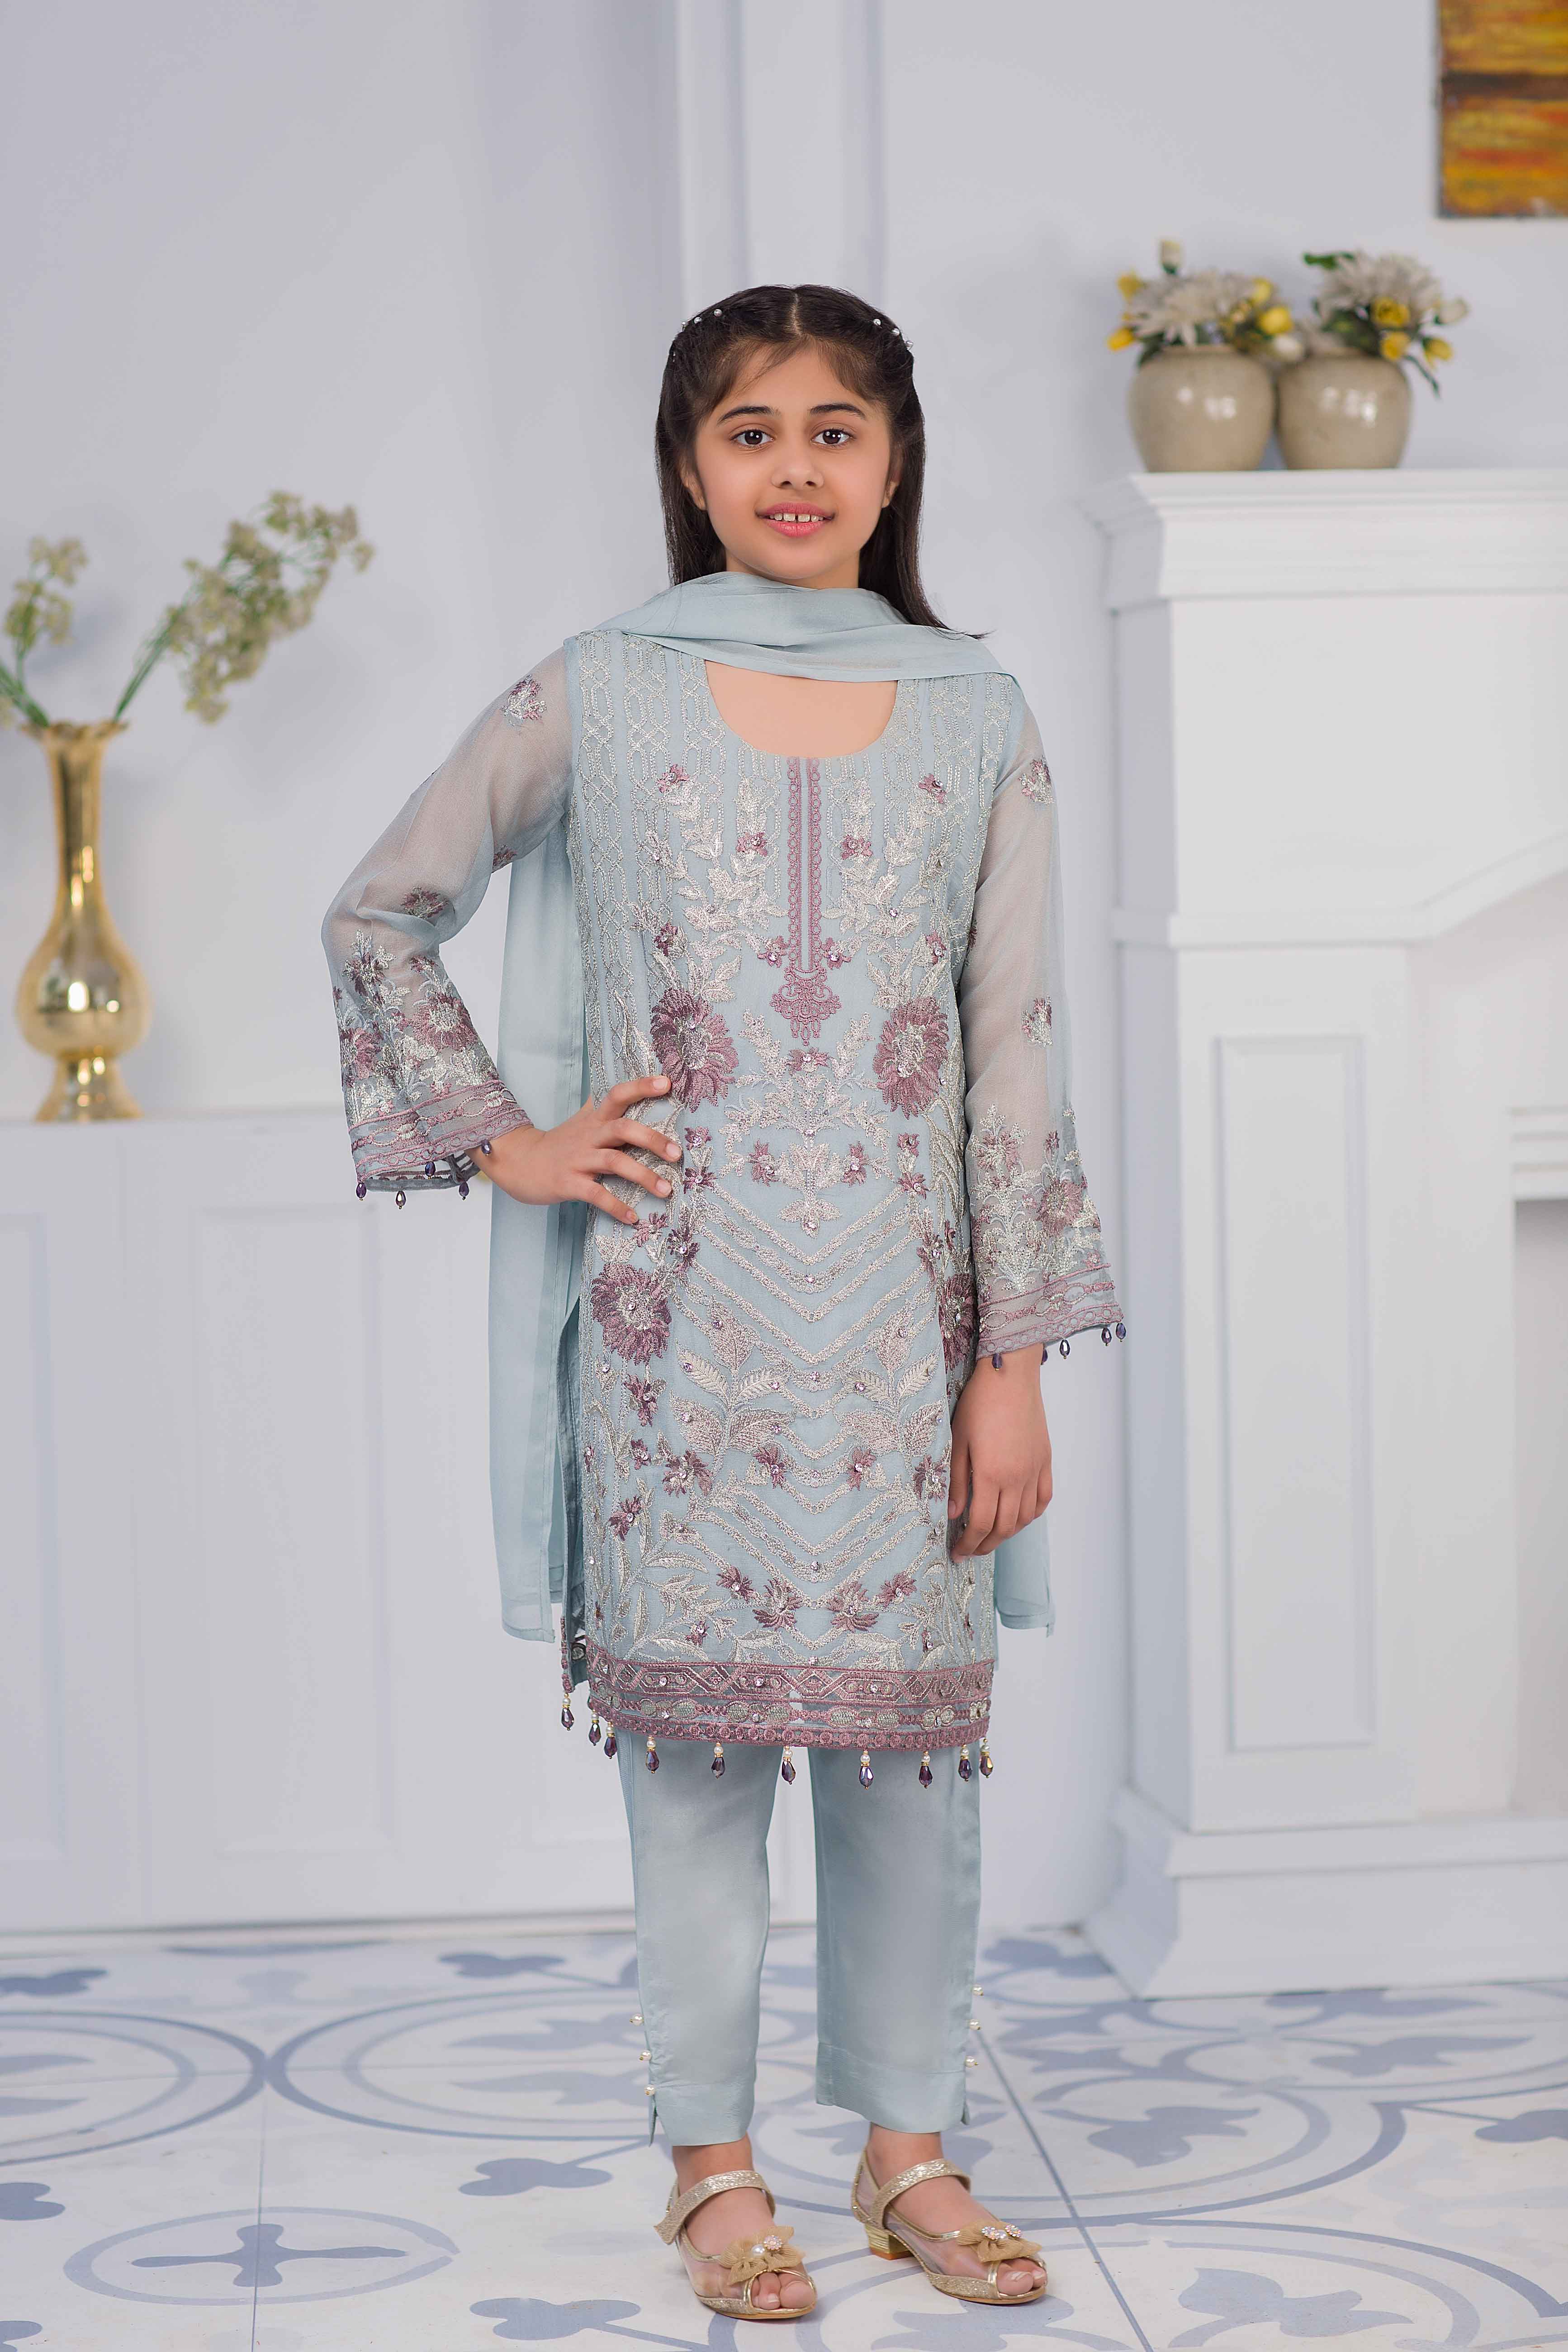 Simran Girls Mother & Daughter Eid Outfit with Embroidered Dupatta - Desi Posh